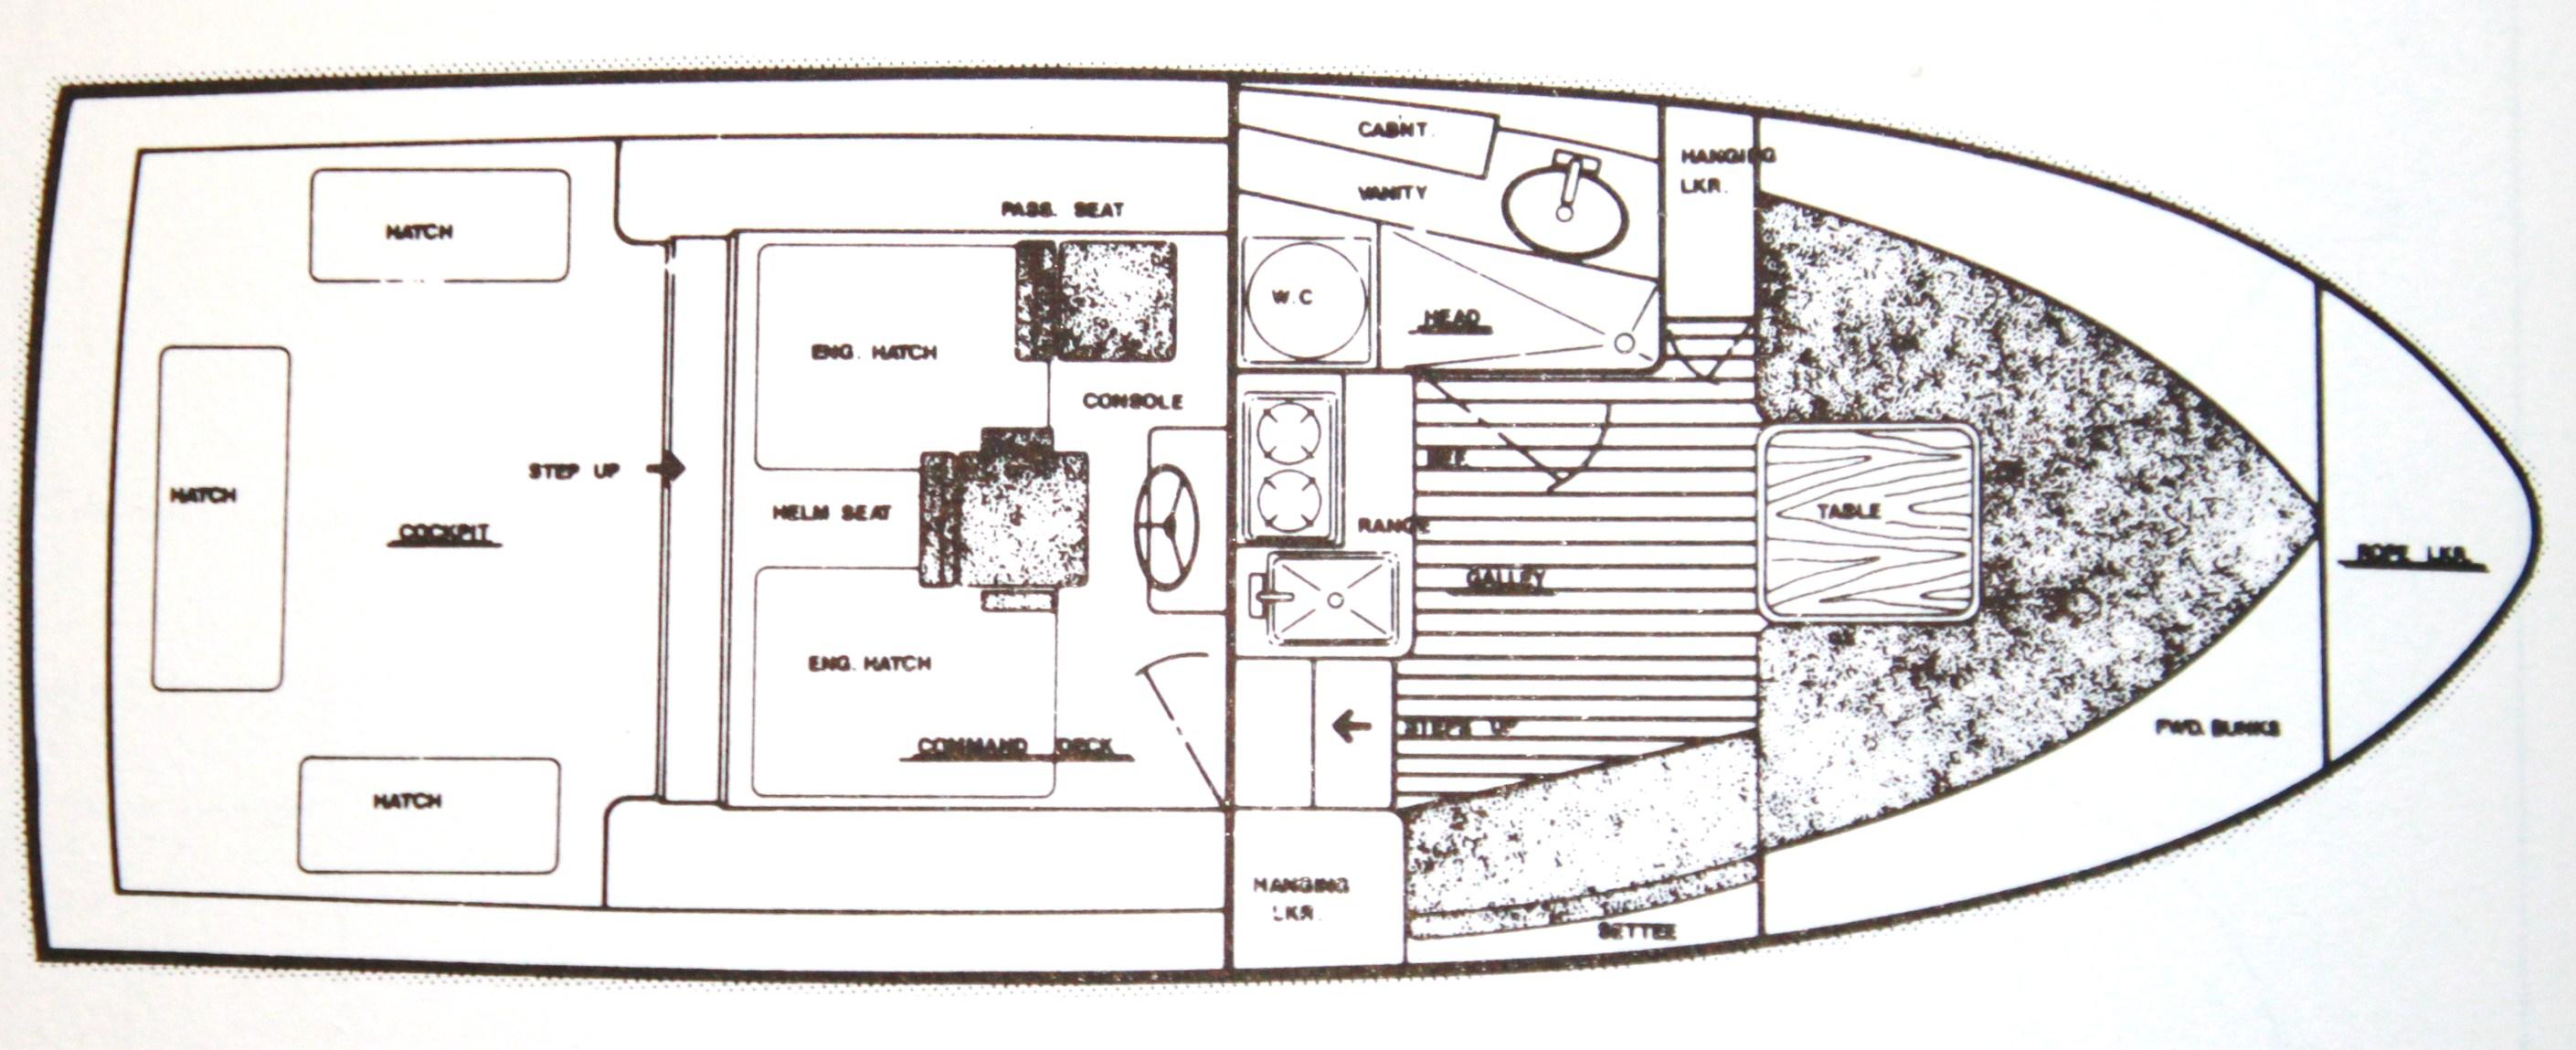 Cabin and Cockpit Layout Drawing